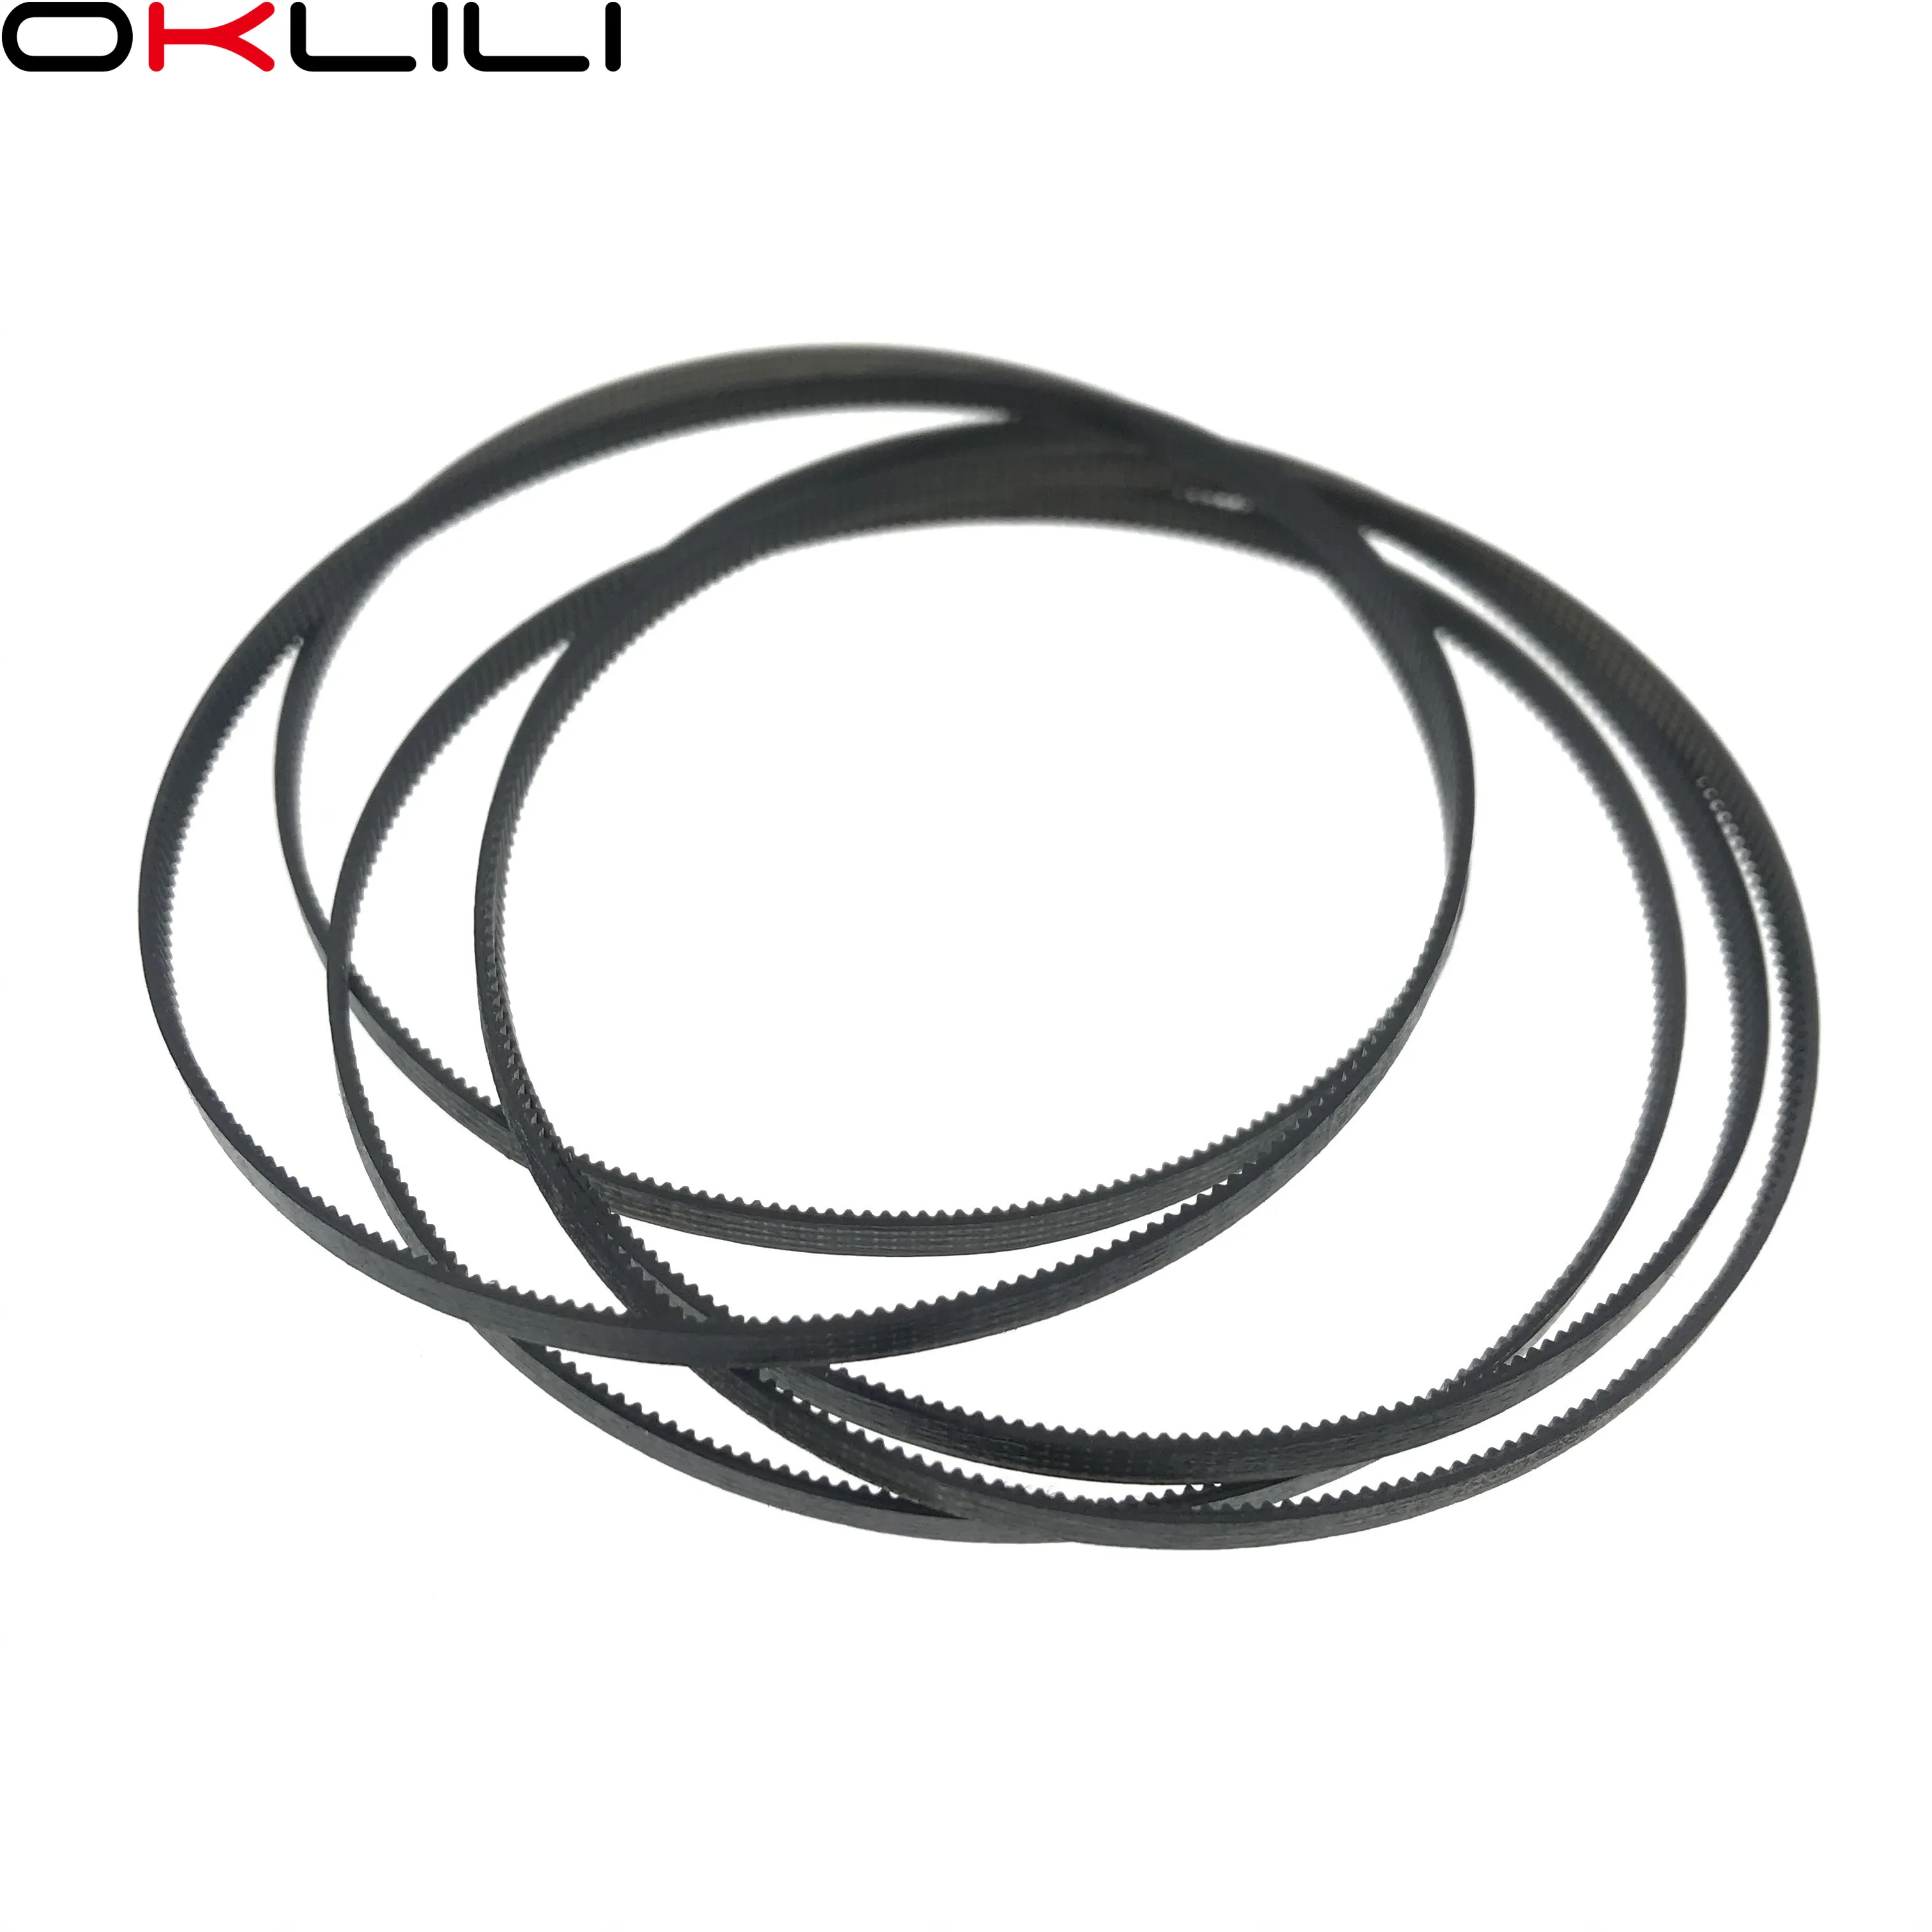 10X CM751-40275 240mm Feed Out Paper Drive Belt for HP OfficeJet 6000 6500 7000 7500 Pro 8100 8600 8610 8620 3610 3620 7110 7610